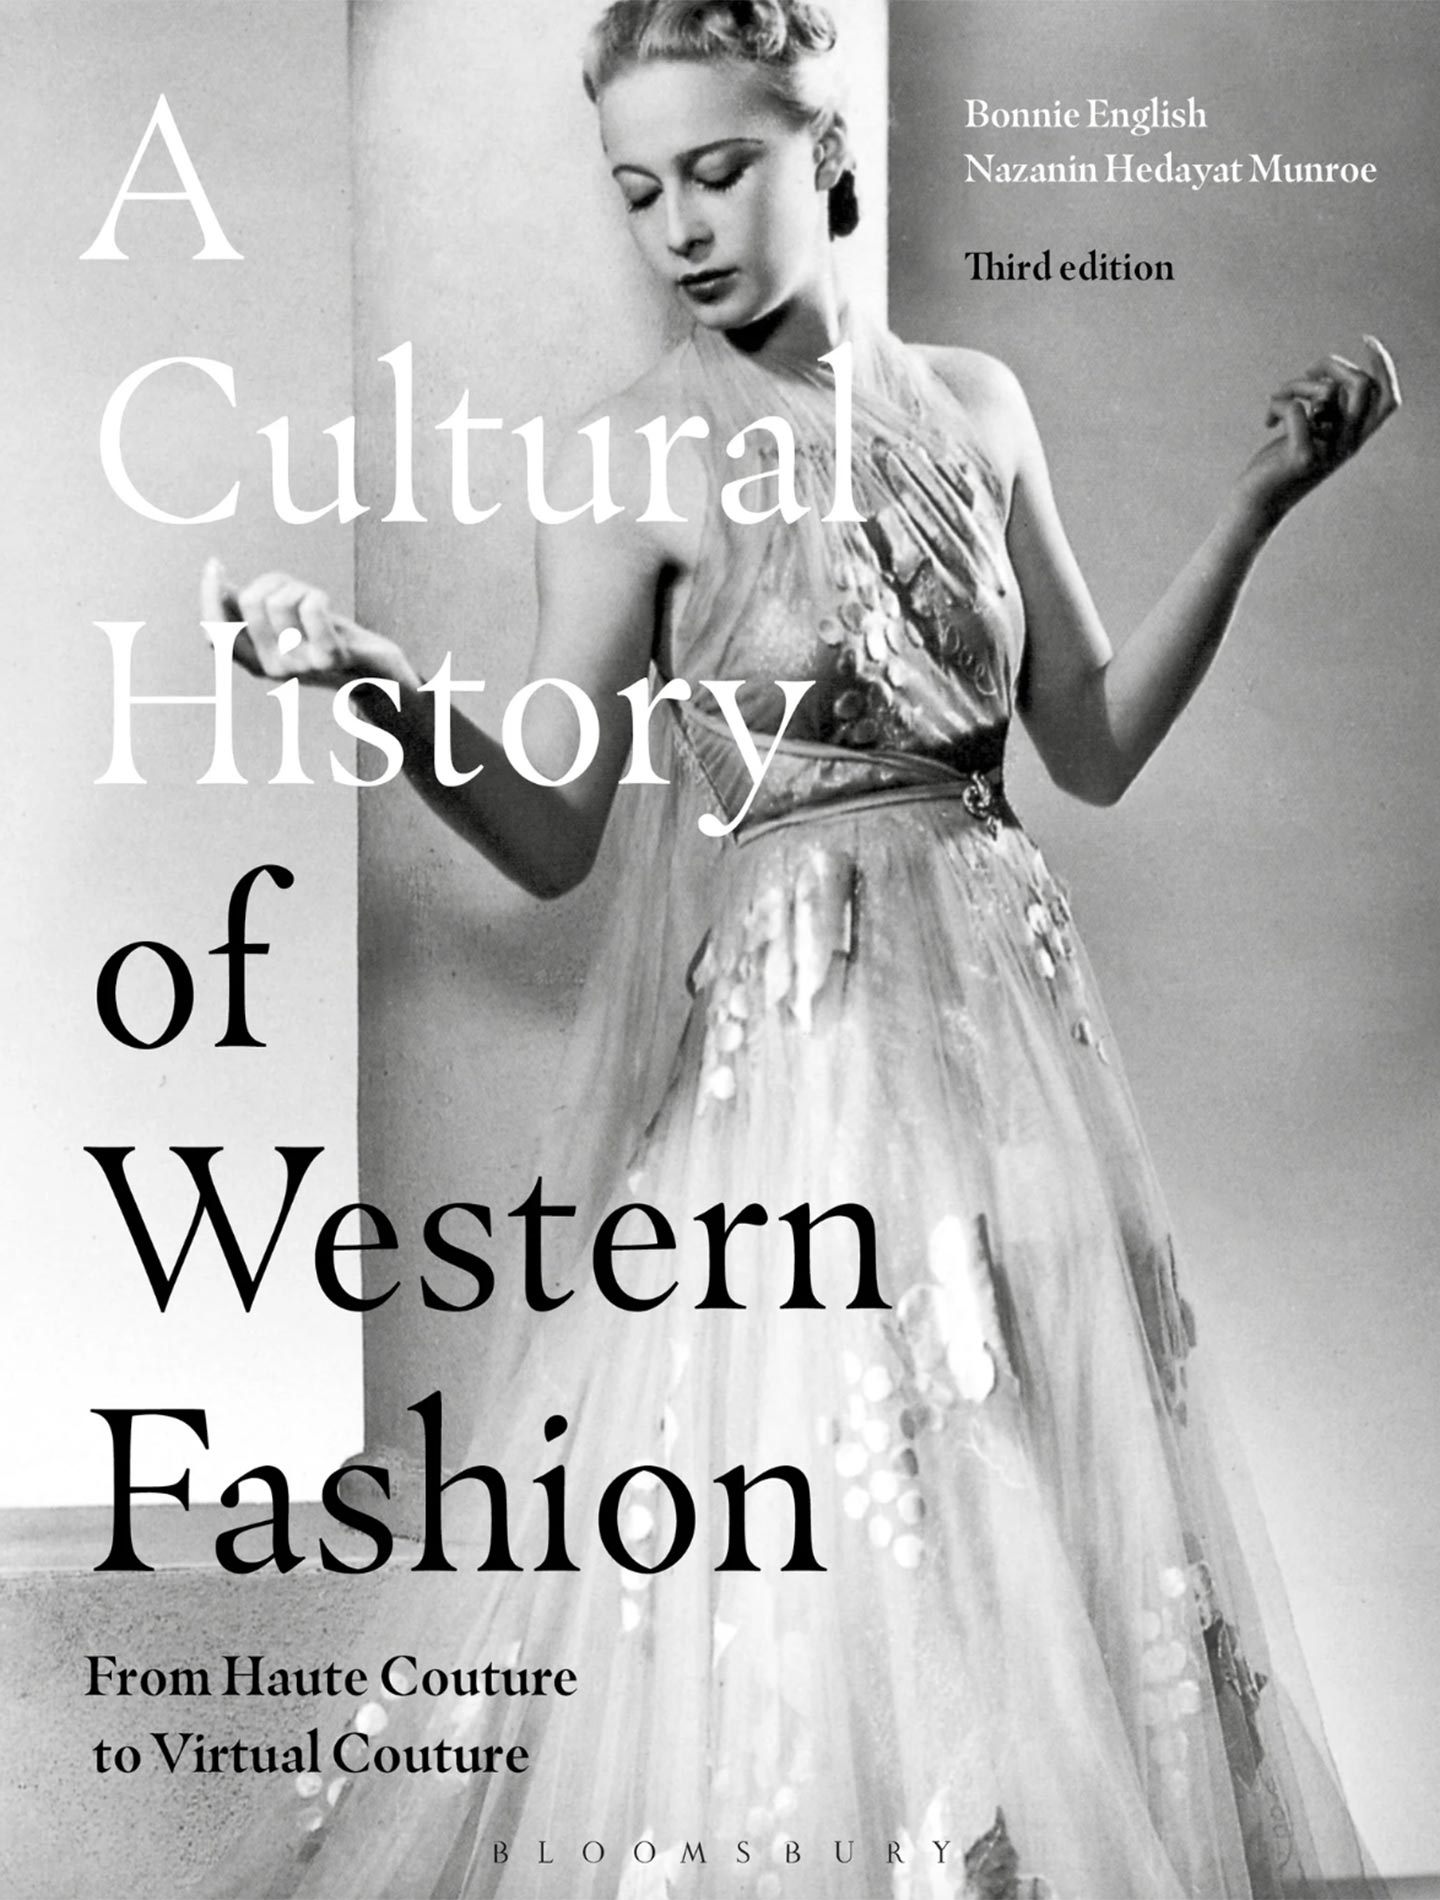 English, B., & Munroe, N.H. (2022) A Cultural History of Western Fashion: From Haute Couture to Virtual Couture. London: Bloomsbury Visual Arts